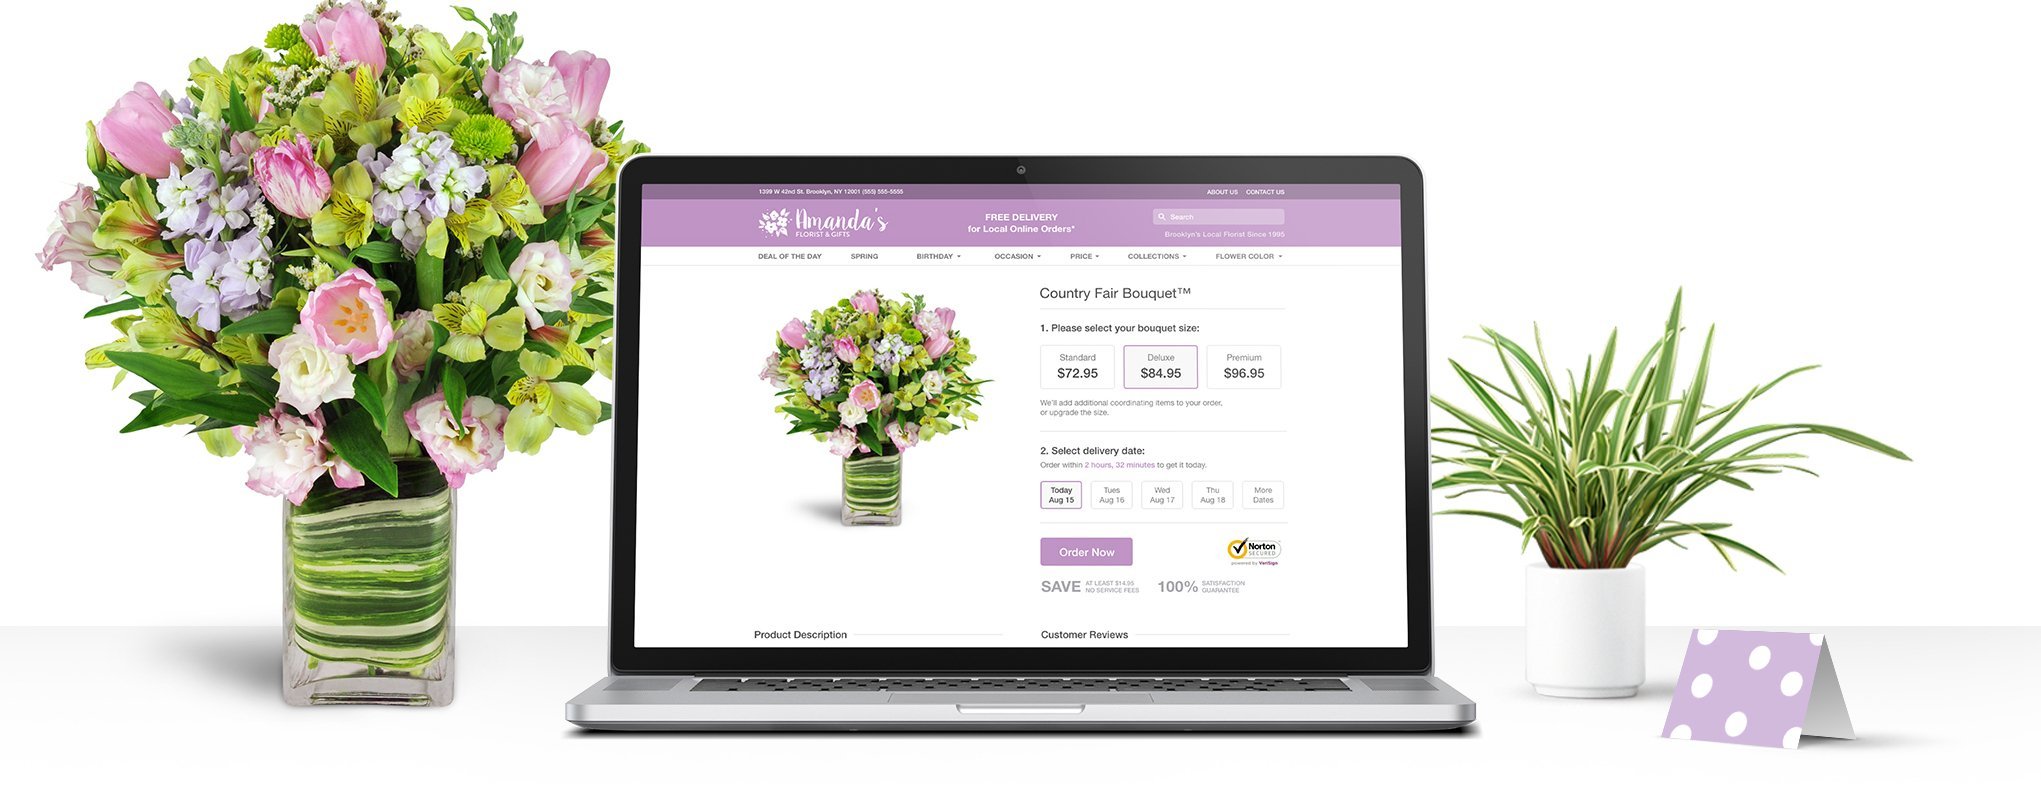 A floral arrangement in glass vase and house plant stand at each side of a laptop displaying a Lovingly Store page.